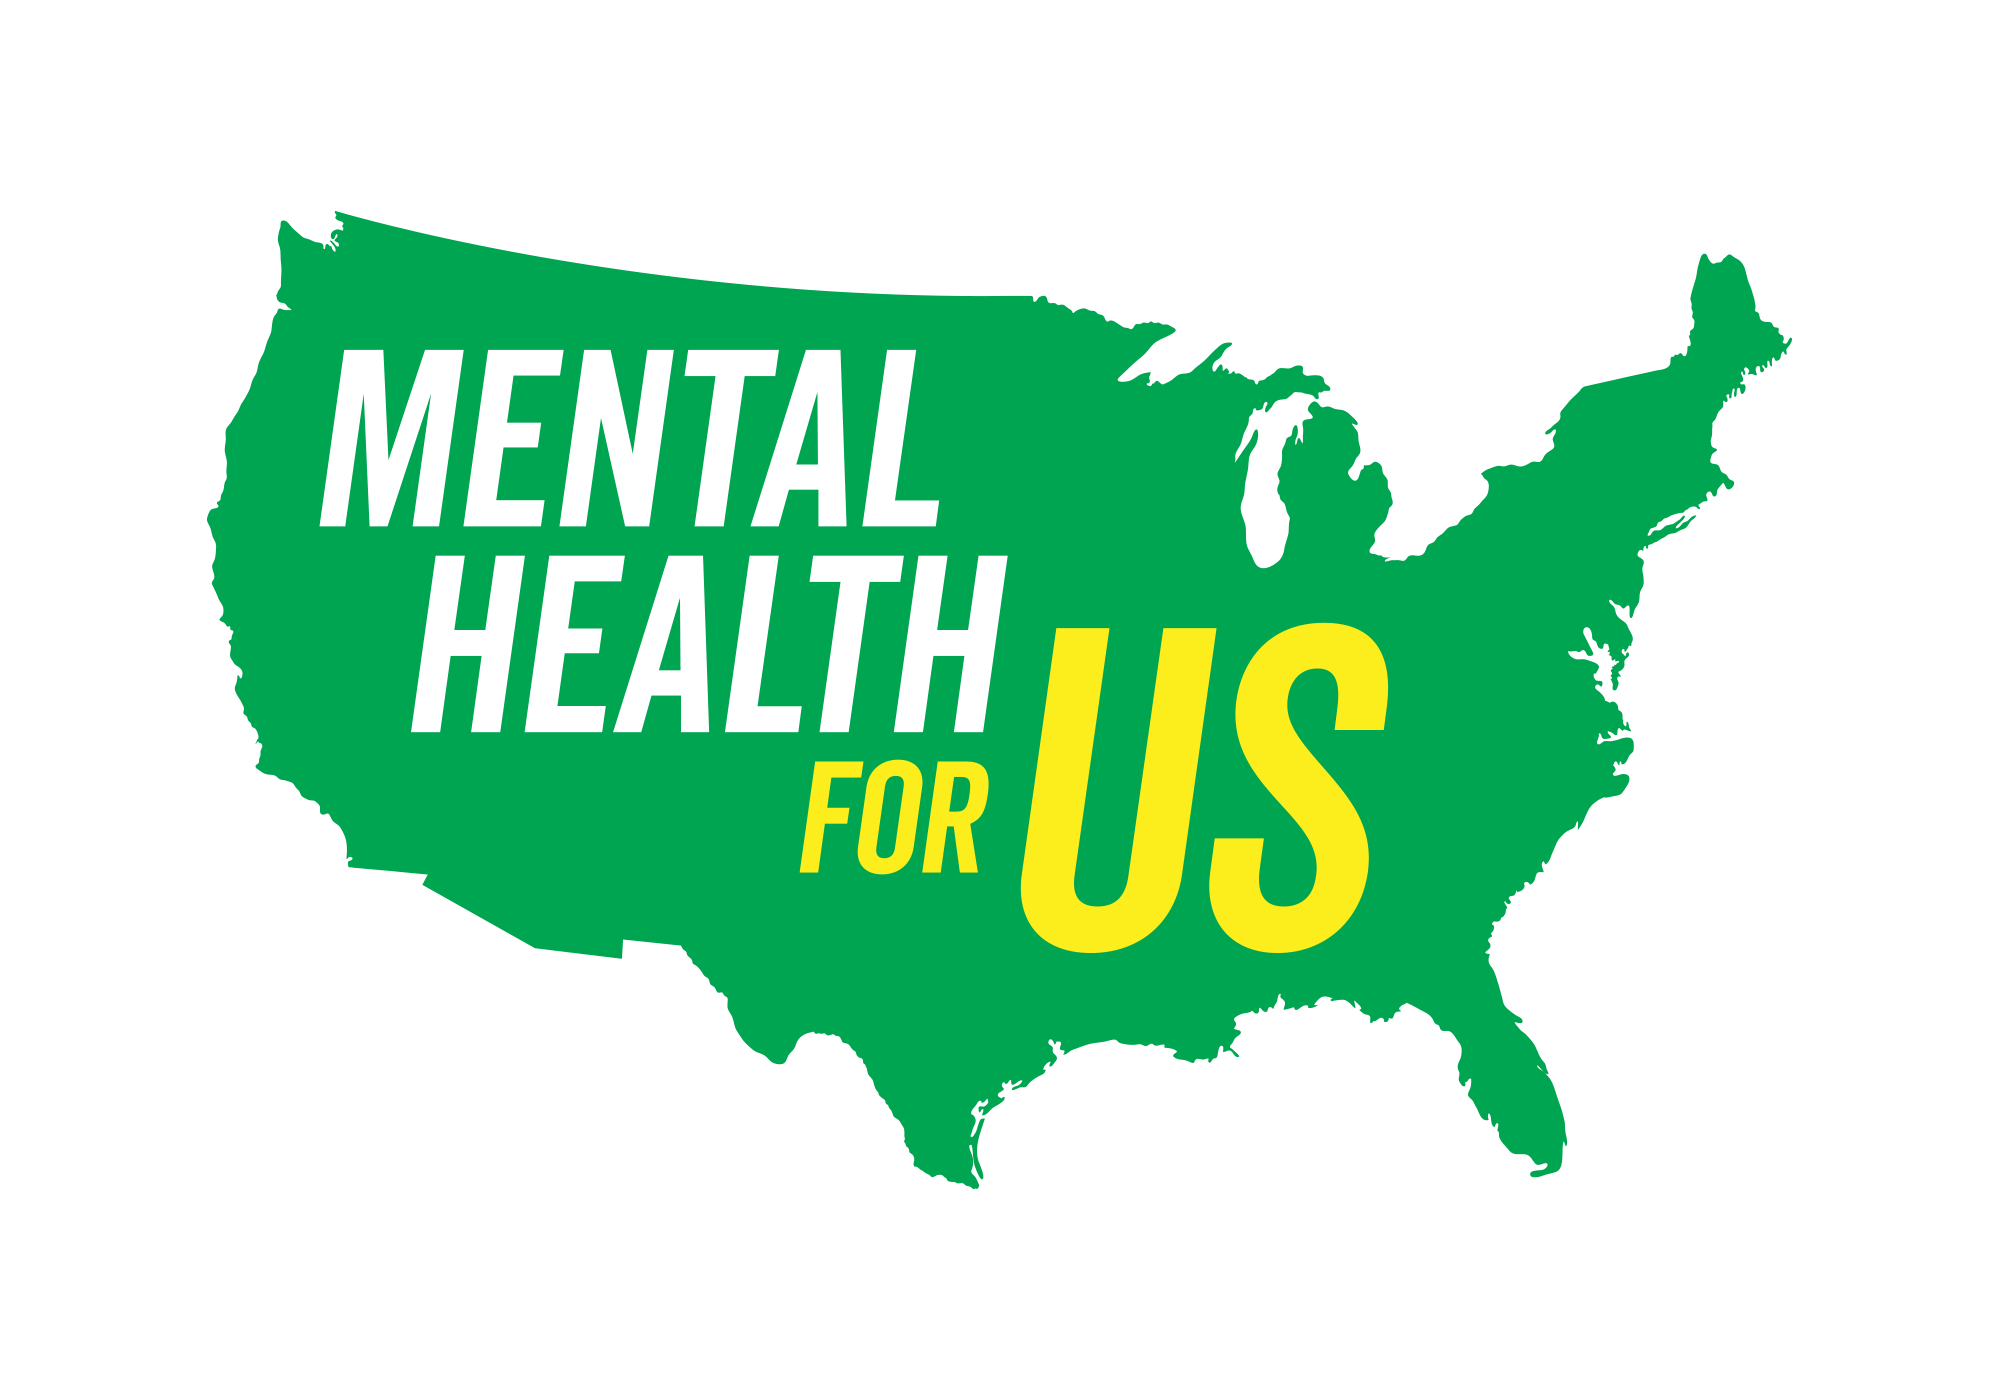 Mental Health for Us Logo in shape of USA